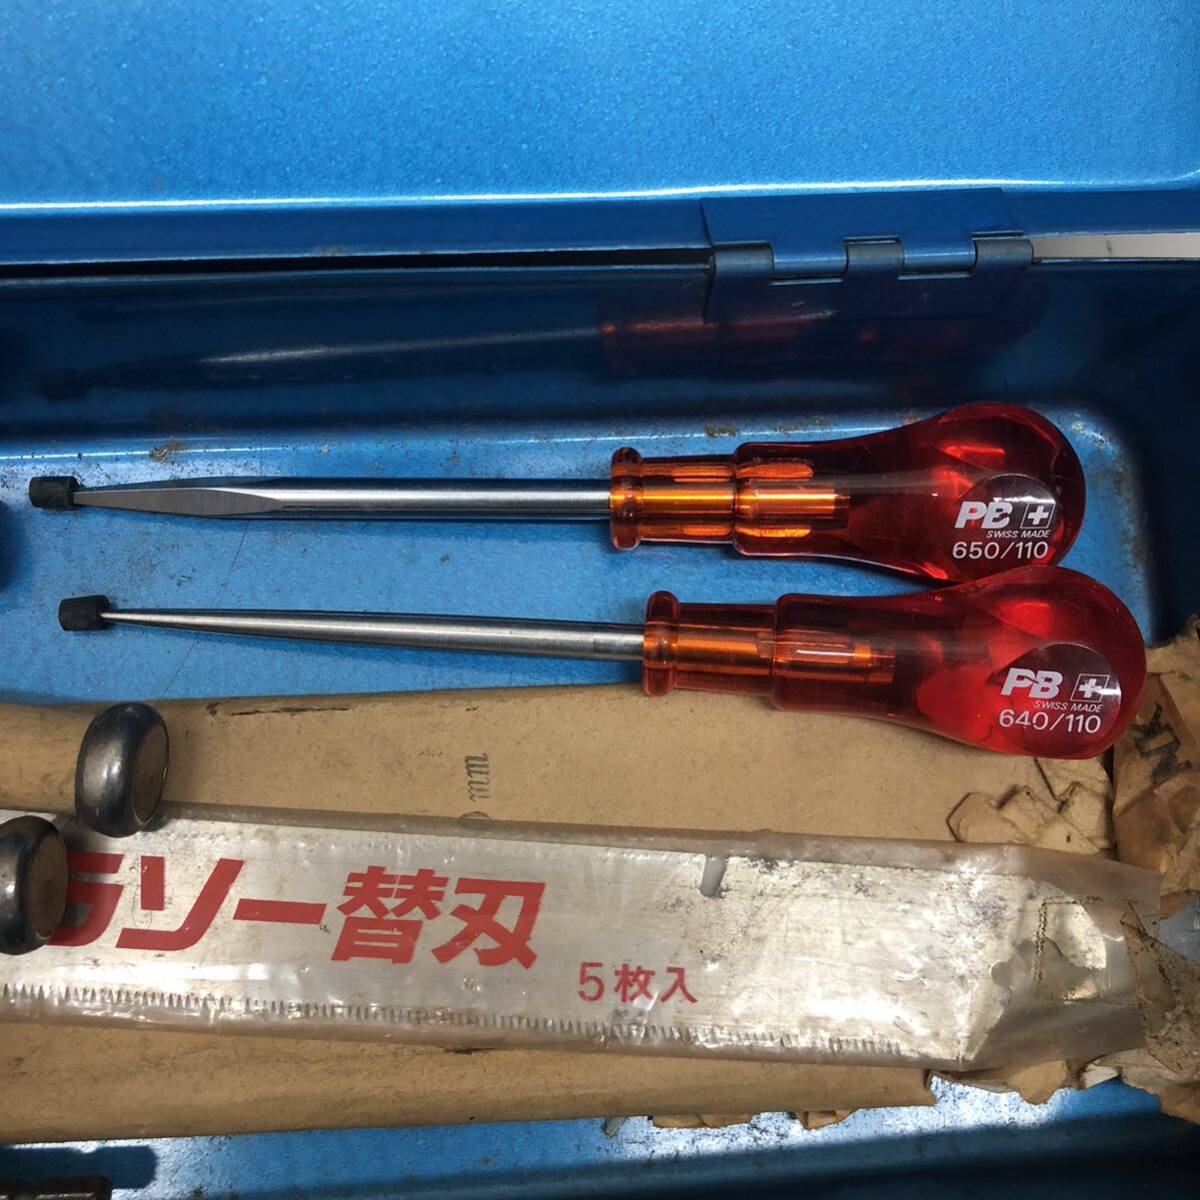  metal plate tool scissors grip etc. various together tool box attaching used present condition goods carpenter's tool DIY